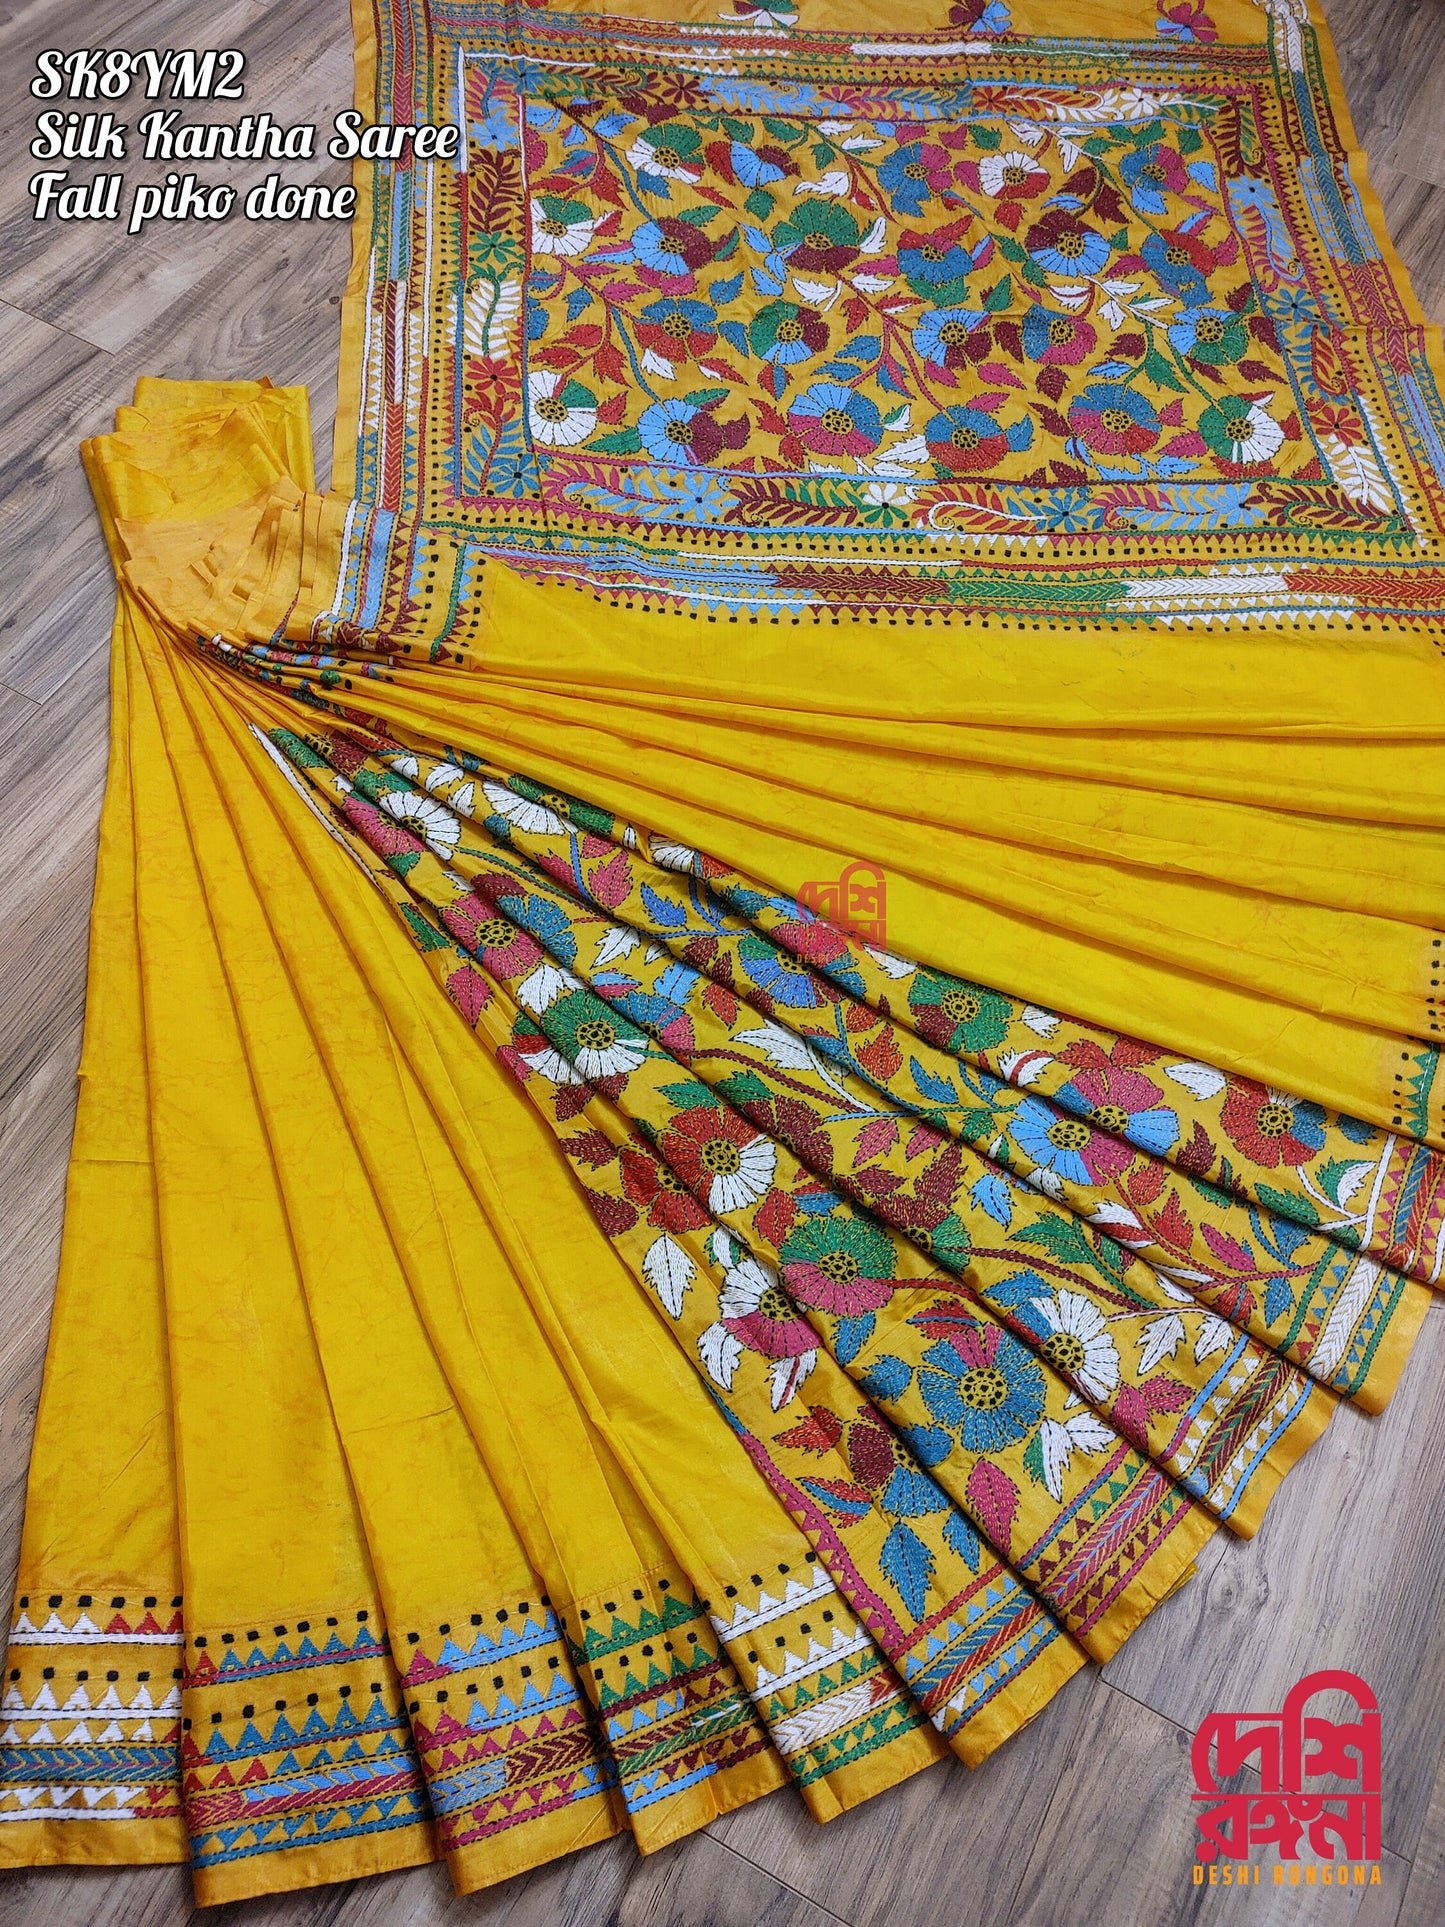 Extraordinary Hand Stiched Kantha Saree, Yellow Bangalore Silk with Multi Kantha Works Allover, Fall Piko Done, Indian Elegant, Classy Saree